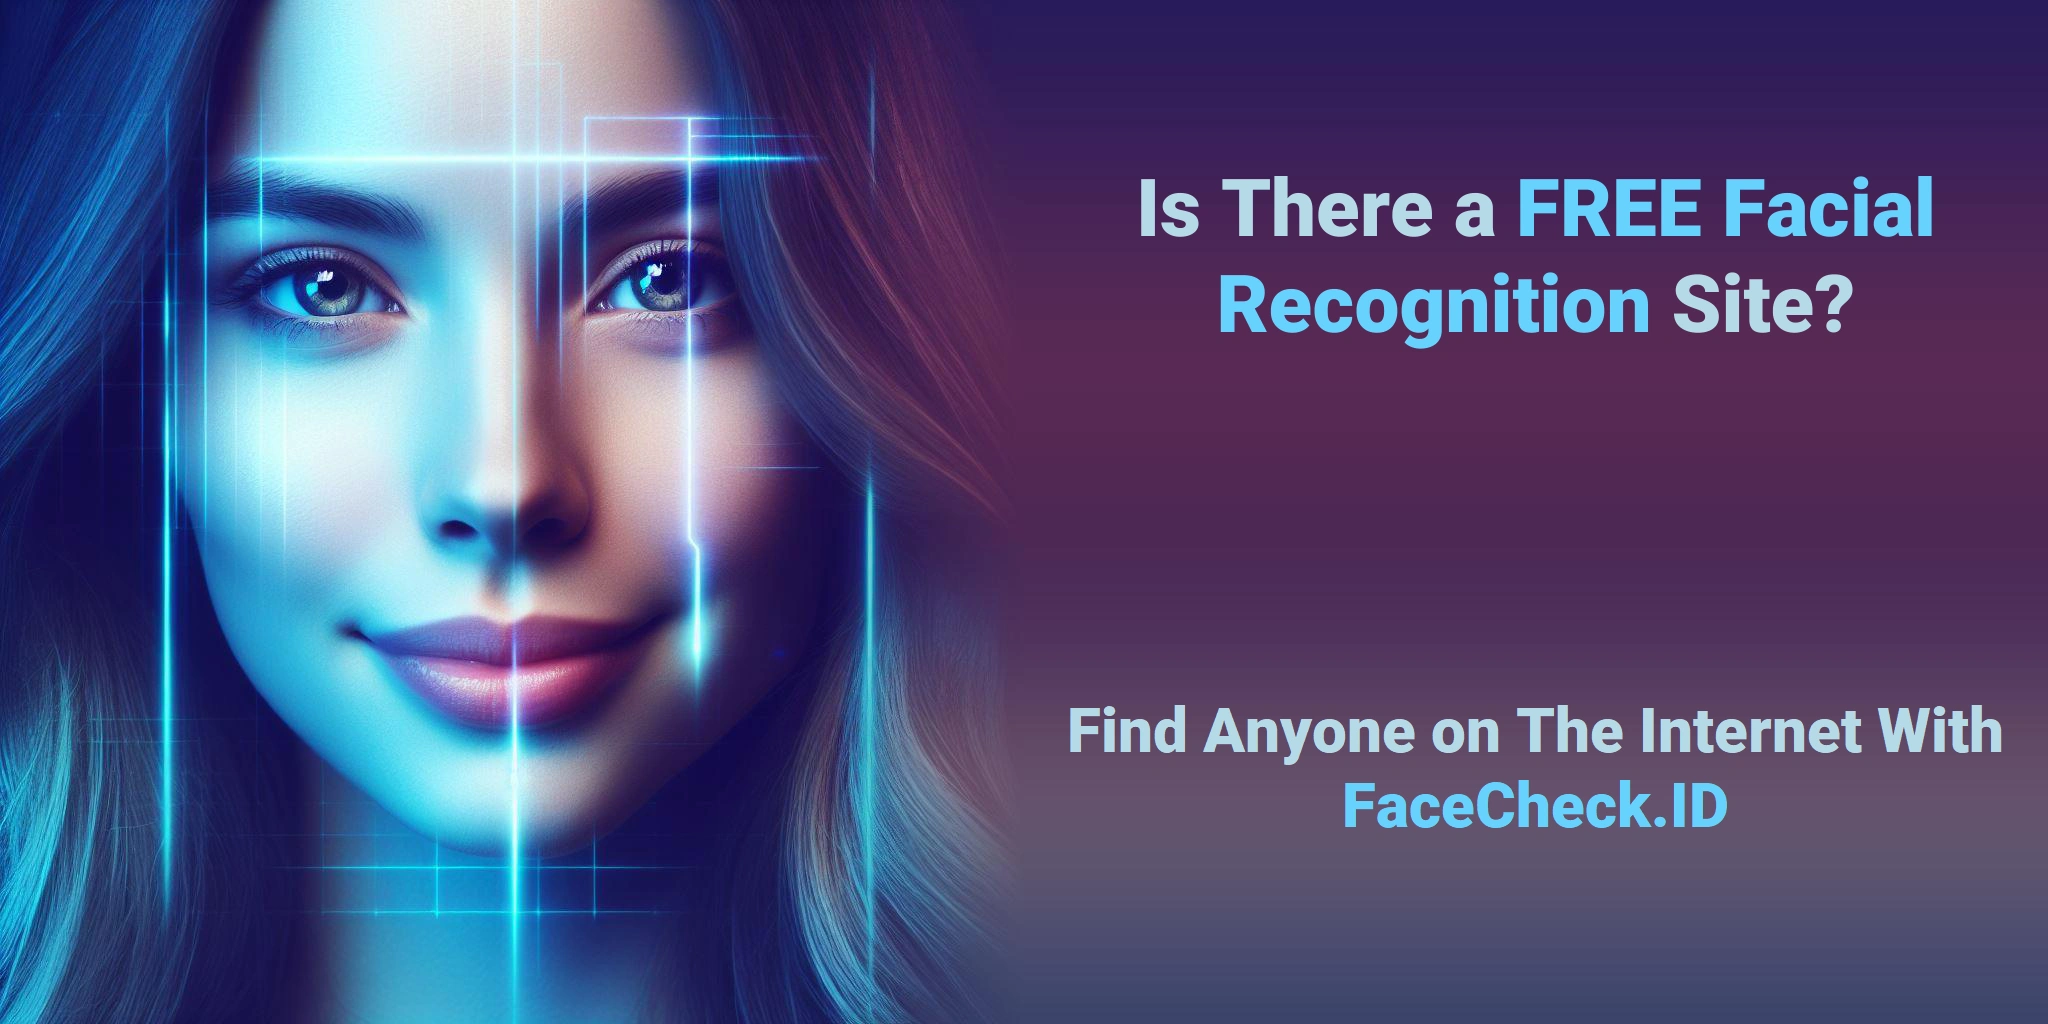 Is There a FREE Facial Recognition Site? Find Anyone on The Internet With FaceCheck.ID